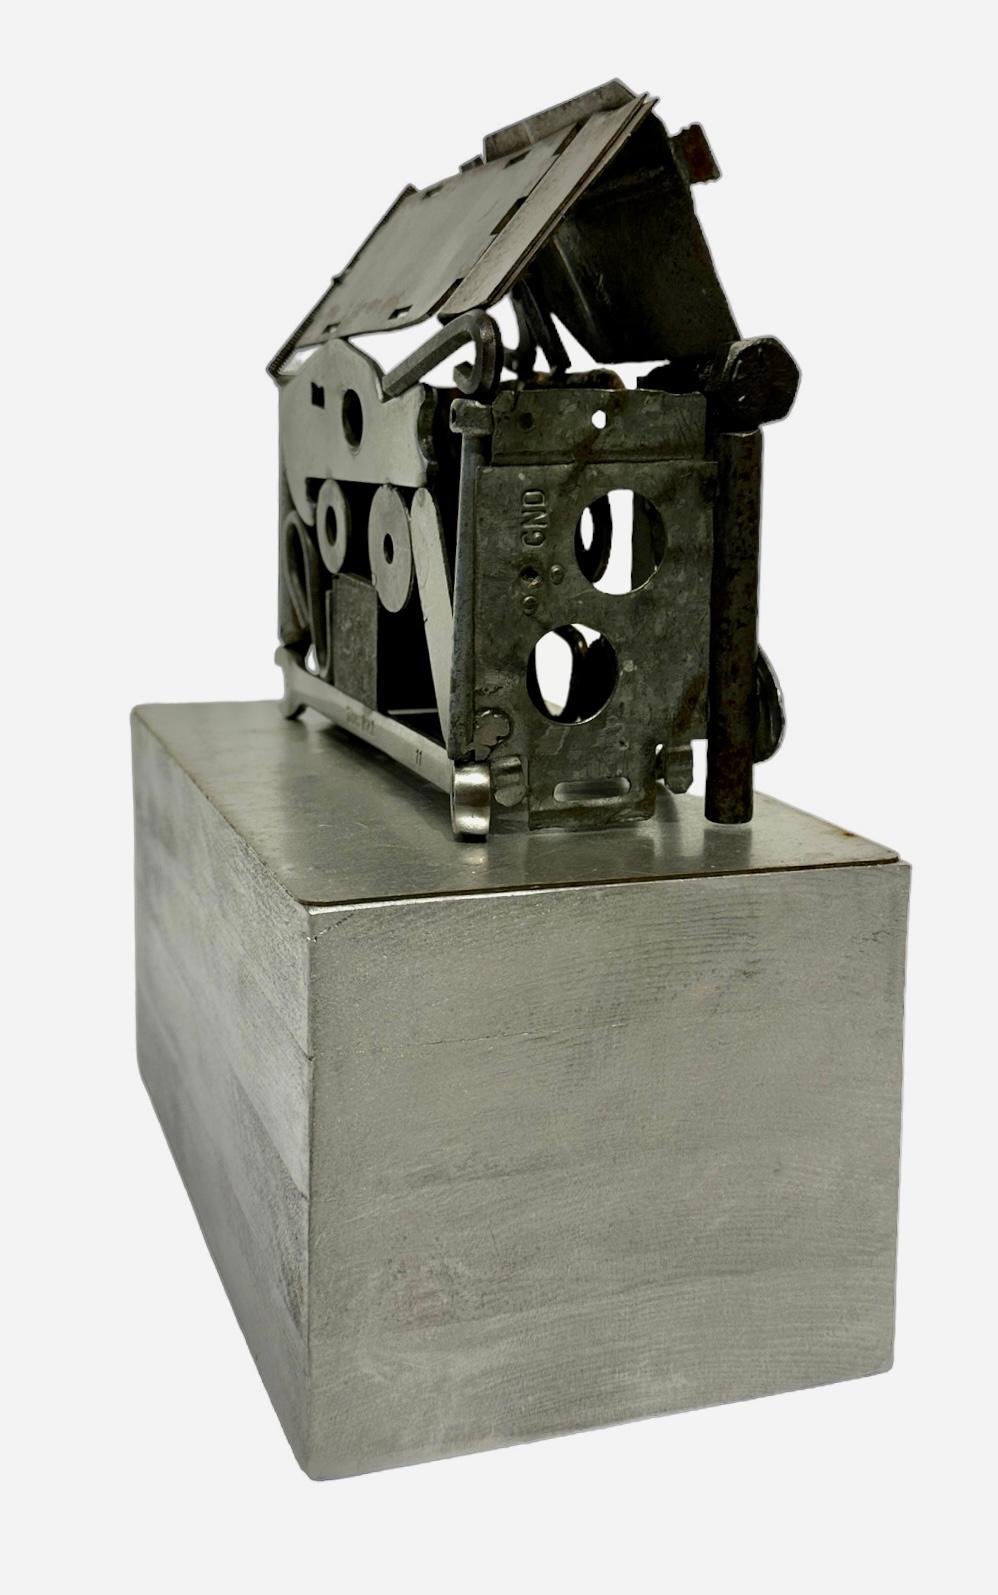 Metal Jim Rose - Construct No. 03, Salvaged Steel and Aluminum Industrial Objects For Sale